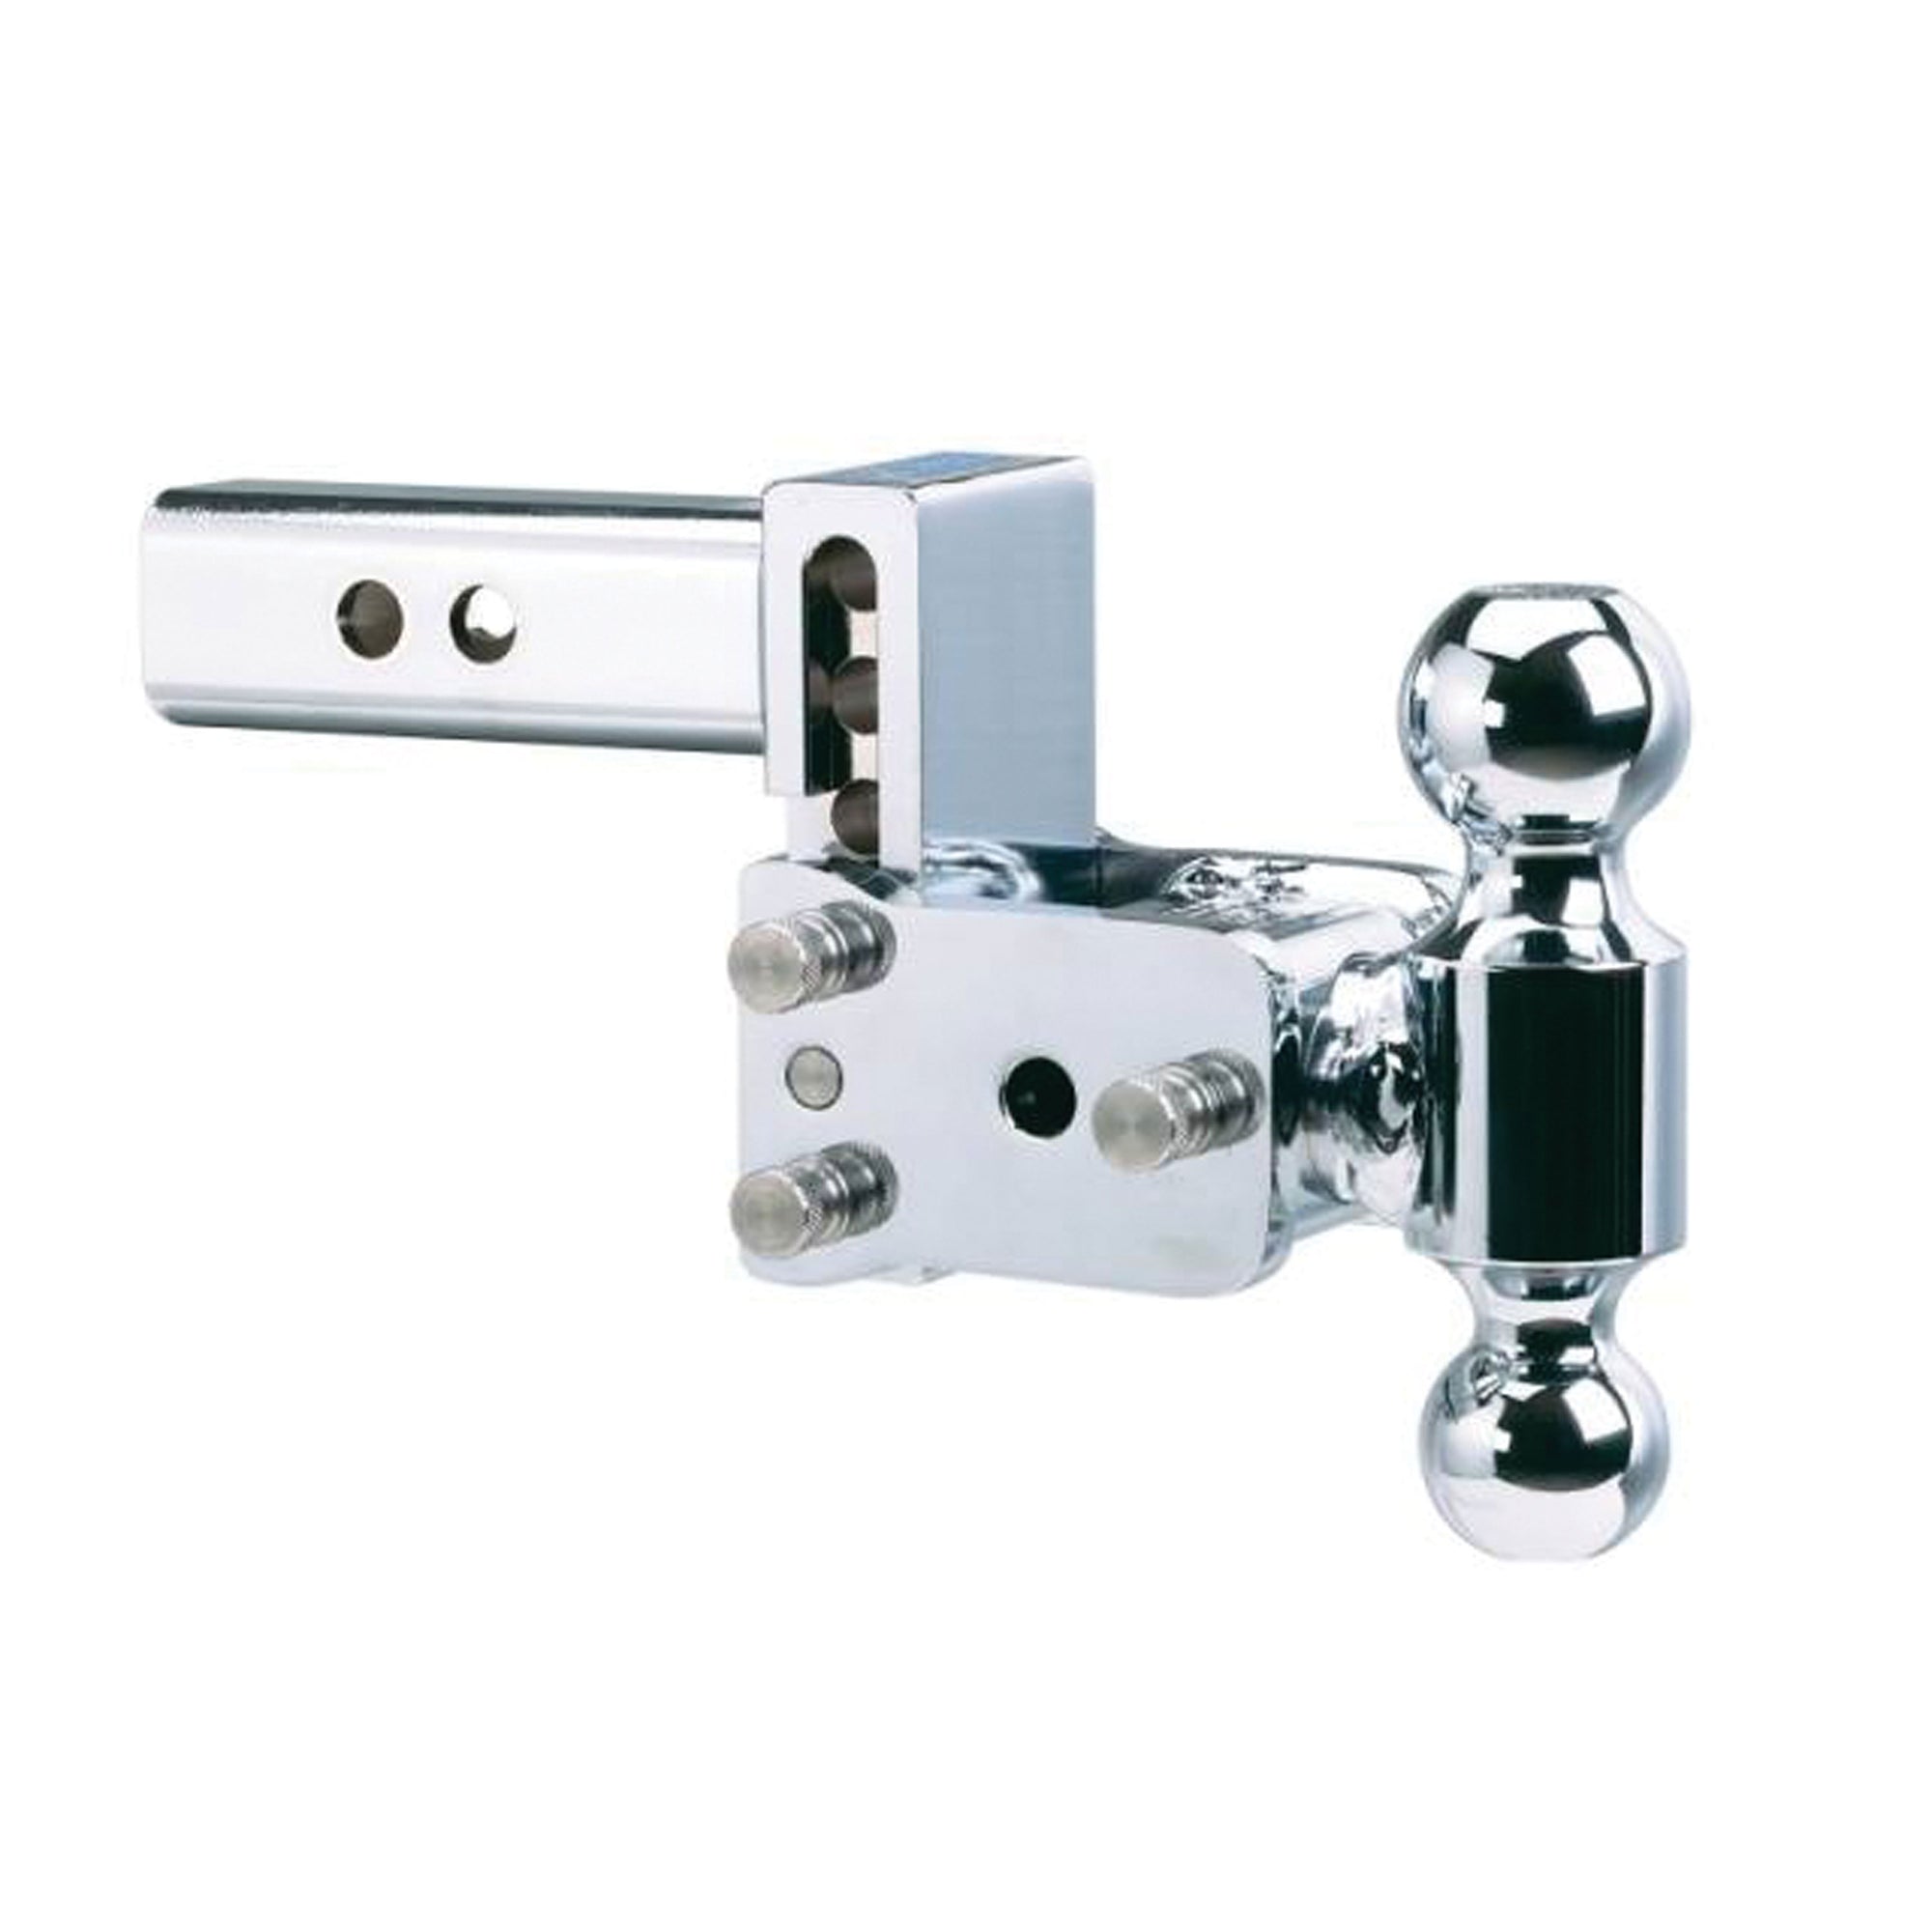 B&W Trailer Hitches TS10033C Tow and Stow Adjustable Ball Mount - 2-5/16" & 2" Ball, 3" Drop, 3.5" Rise, Chrome